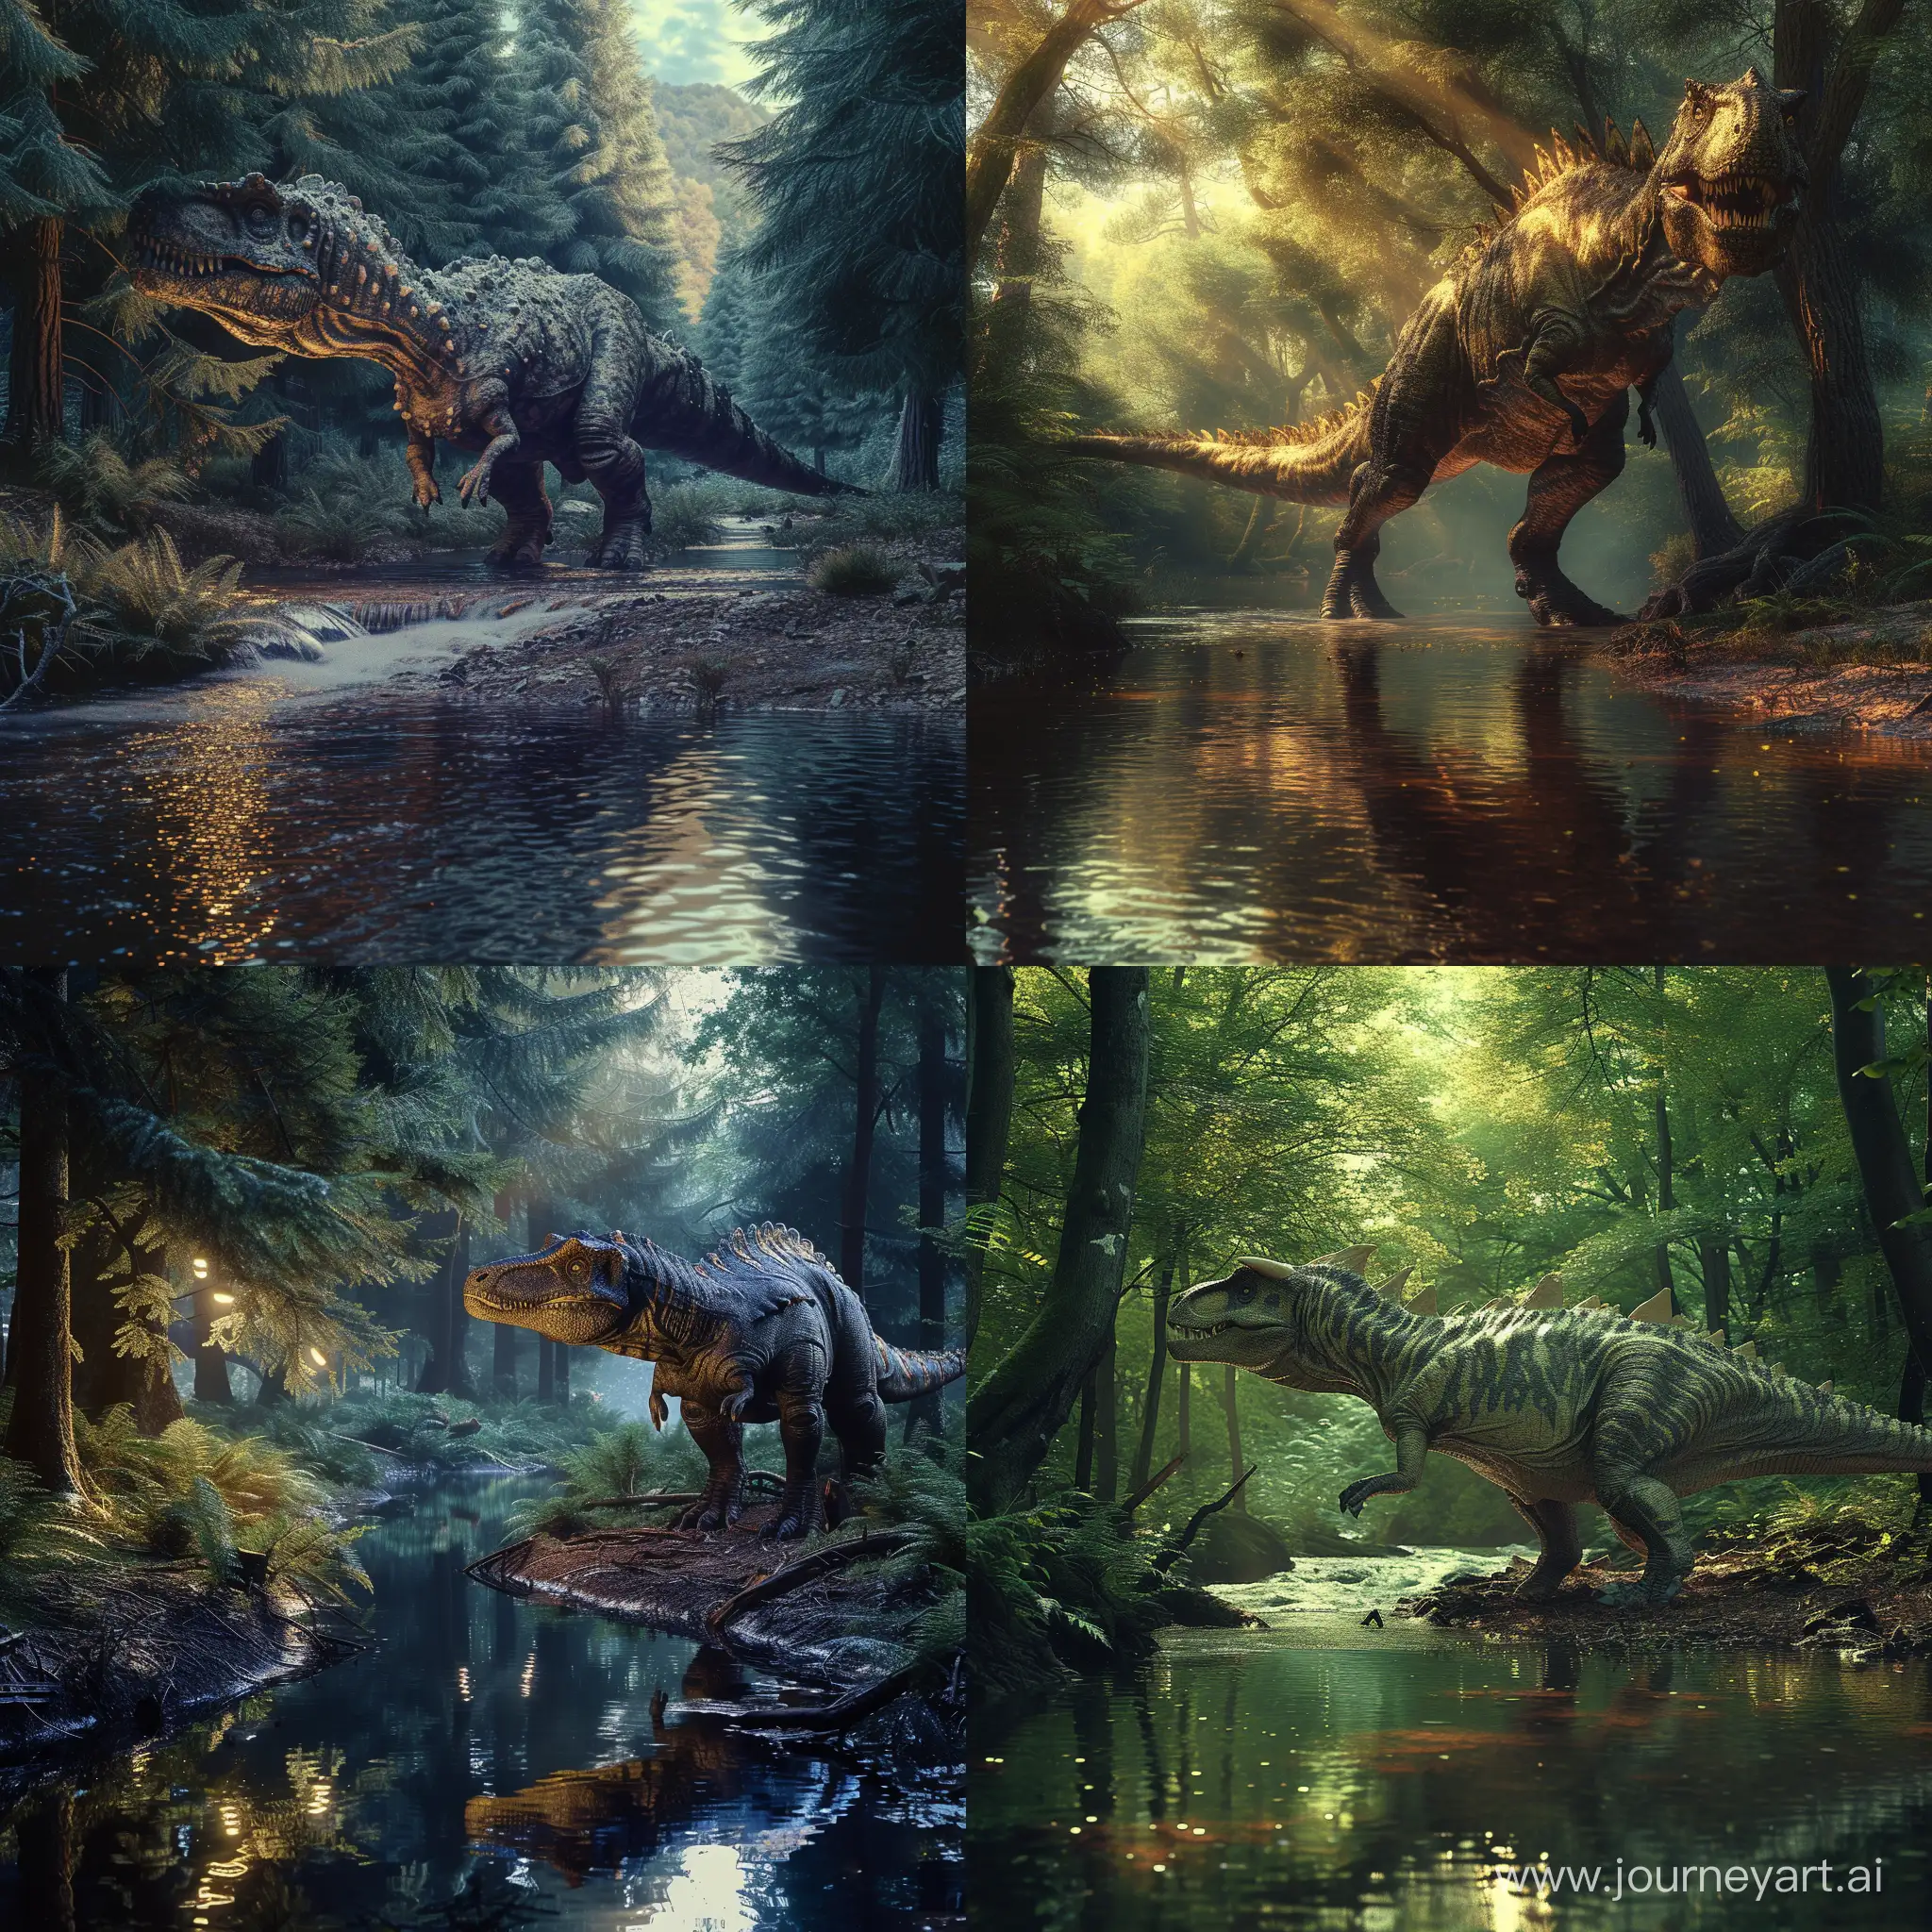 hyper realistic dinosaur in a forest near a river; hyper realistic scene with all cinema techniques, lights, water, reflection, etc.; all the techniques that exist to make a photo hyper realistic and cinematic.